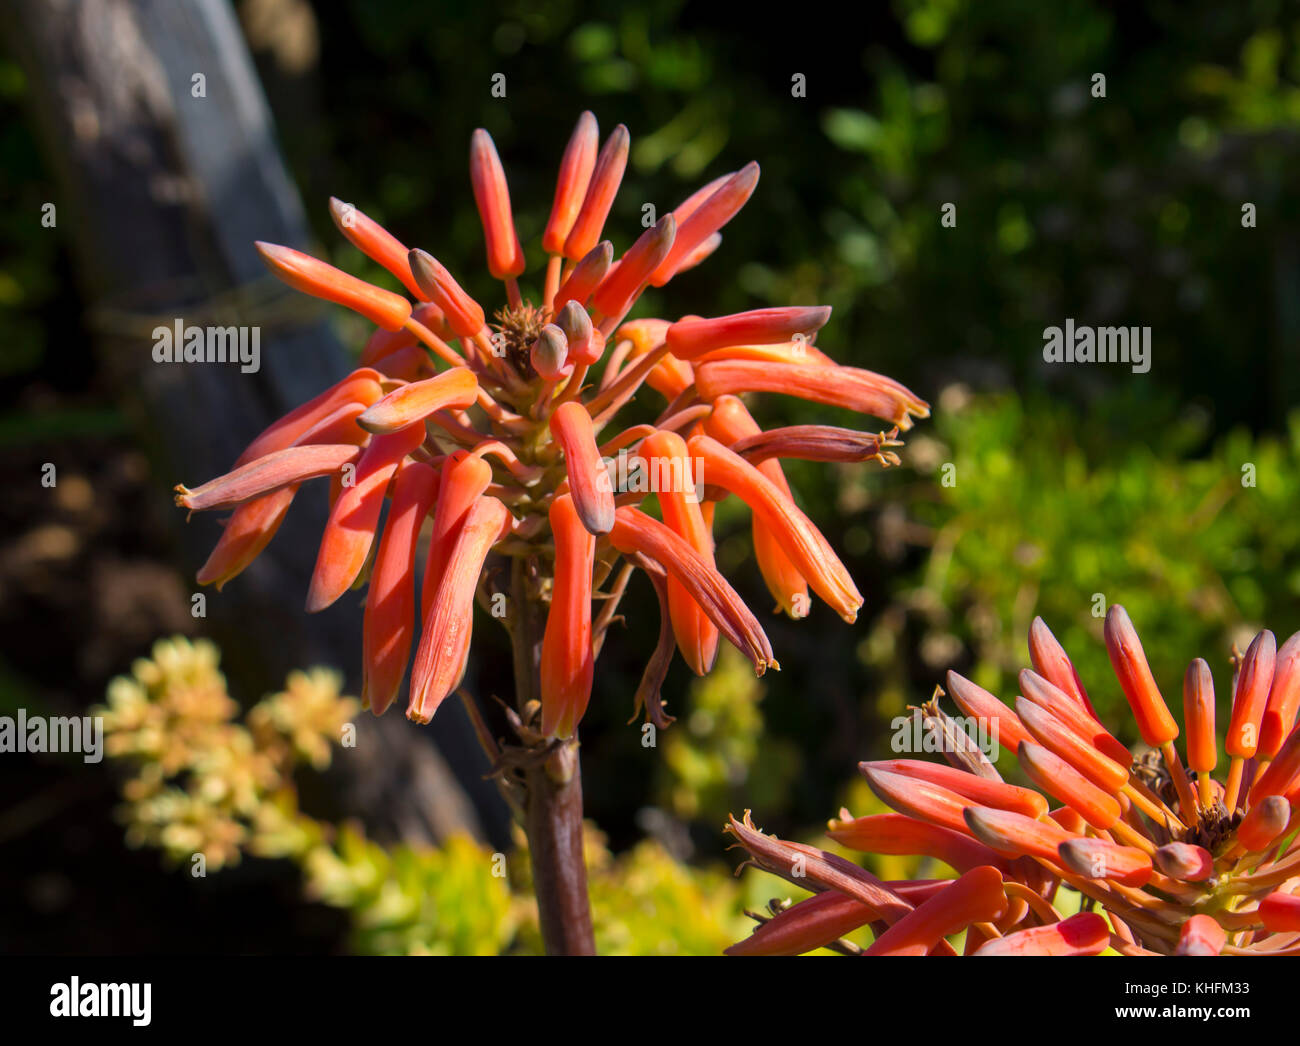 Spectacular Striking Tall Bright Orange Tubular Flower Spikes Of An Aloe Succulent Species In Late Winter Bloom Are Decorative And Long Lasting Stock Photo Alamy